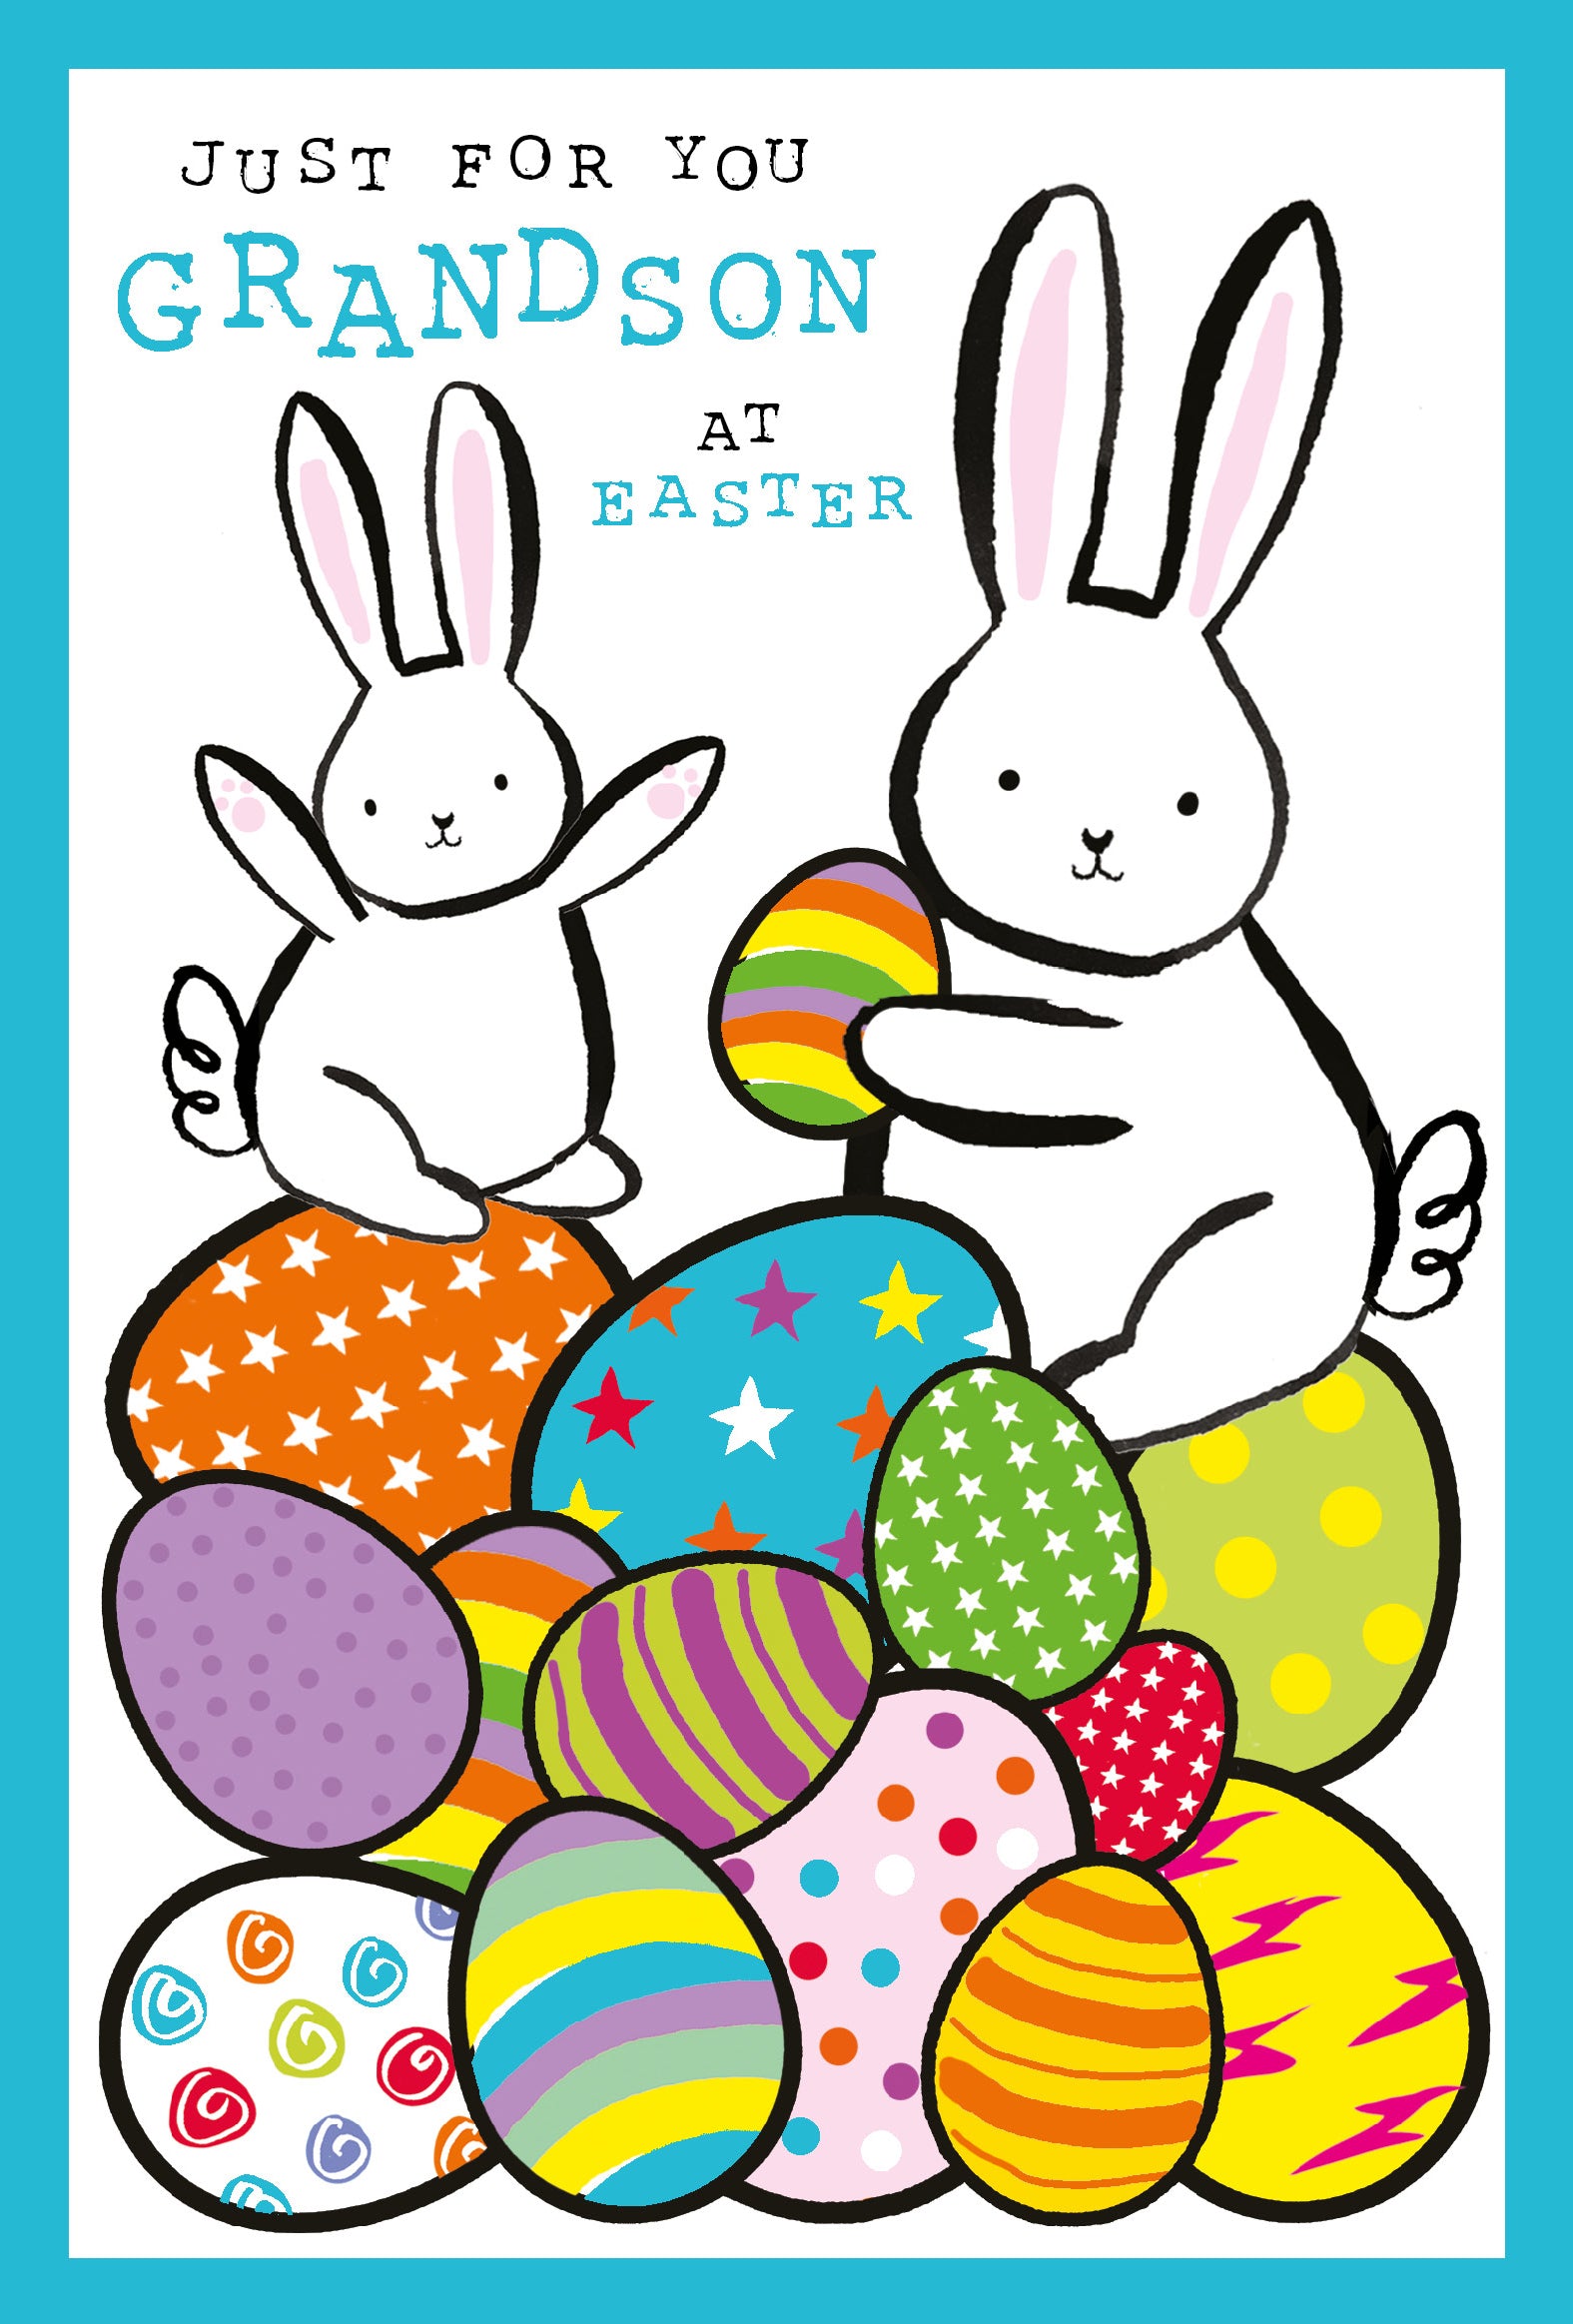 Grandson Bunny Fun Easter Card by penny black